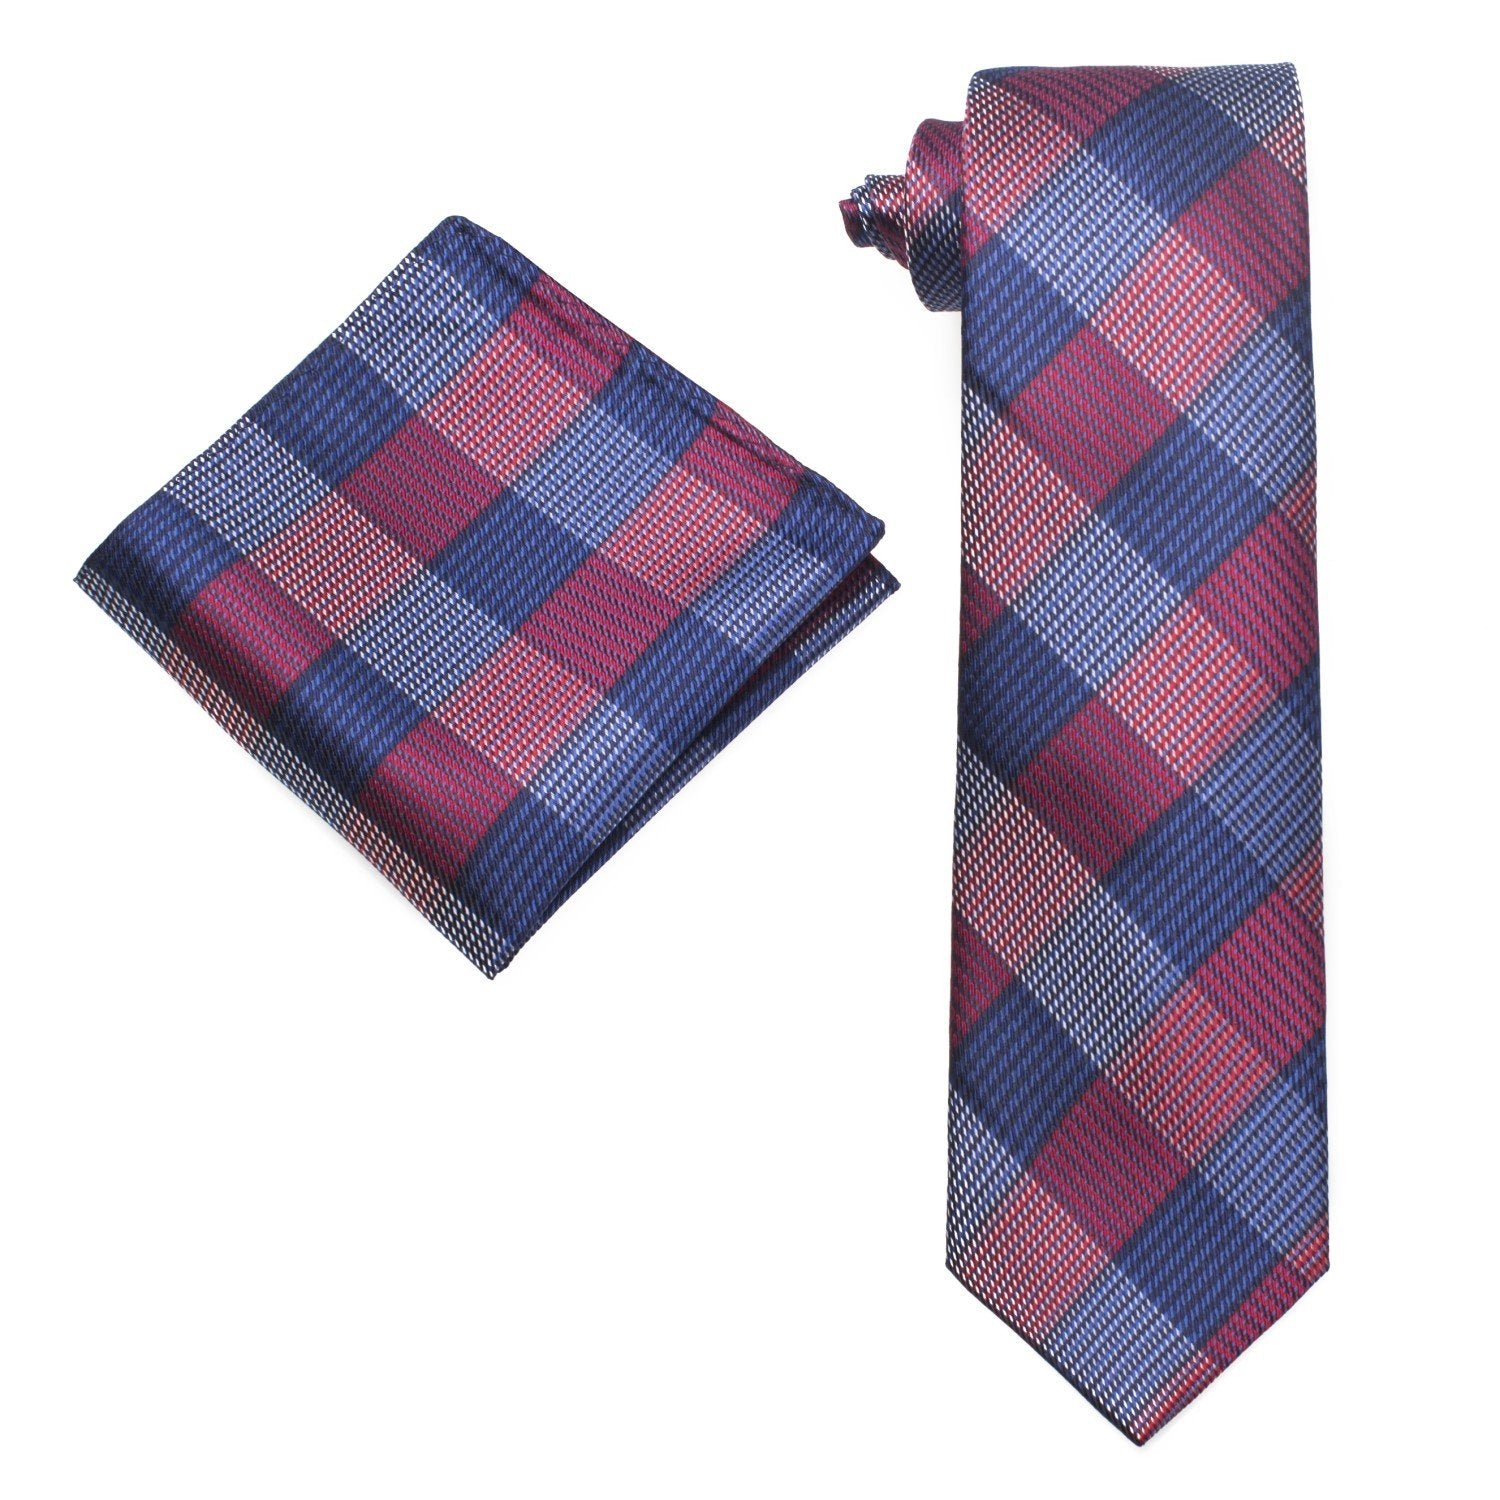 Alt View: Red and Blue Plaid Tie and Pocket Square